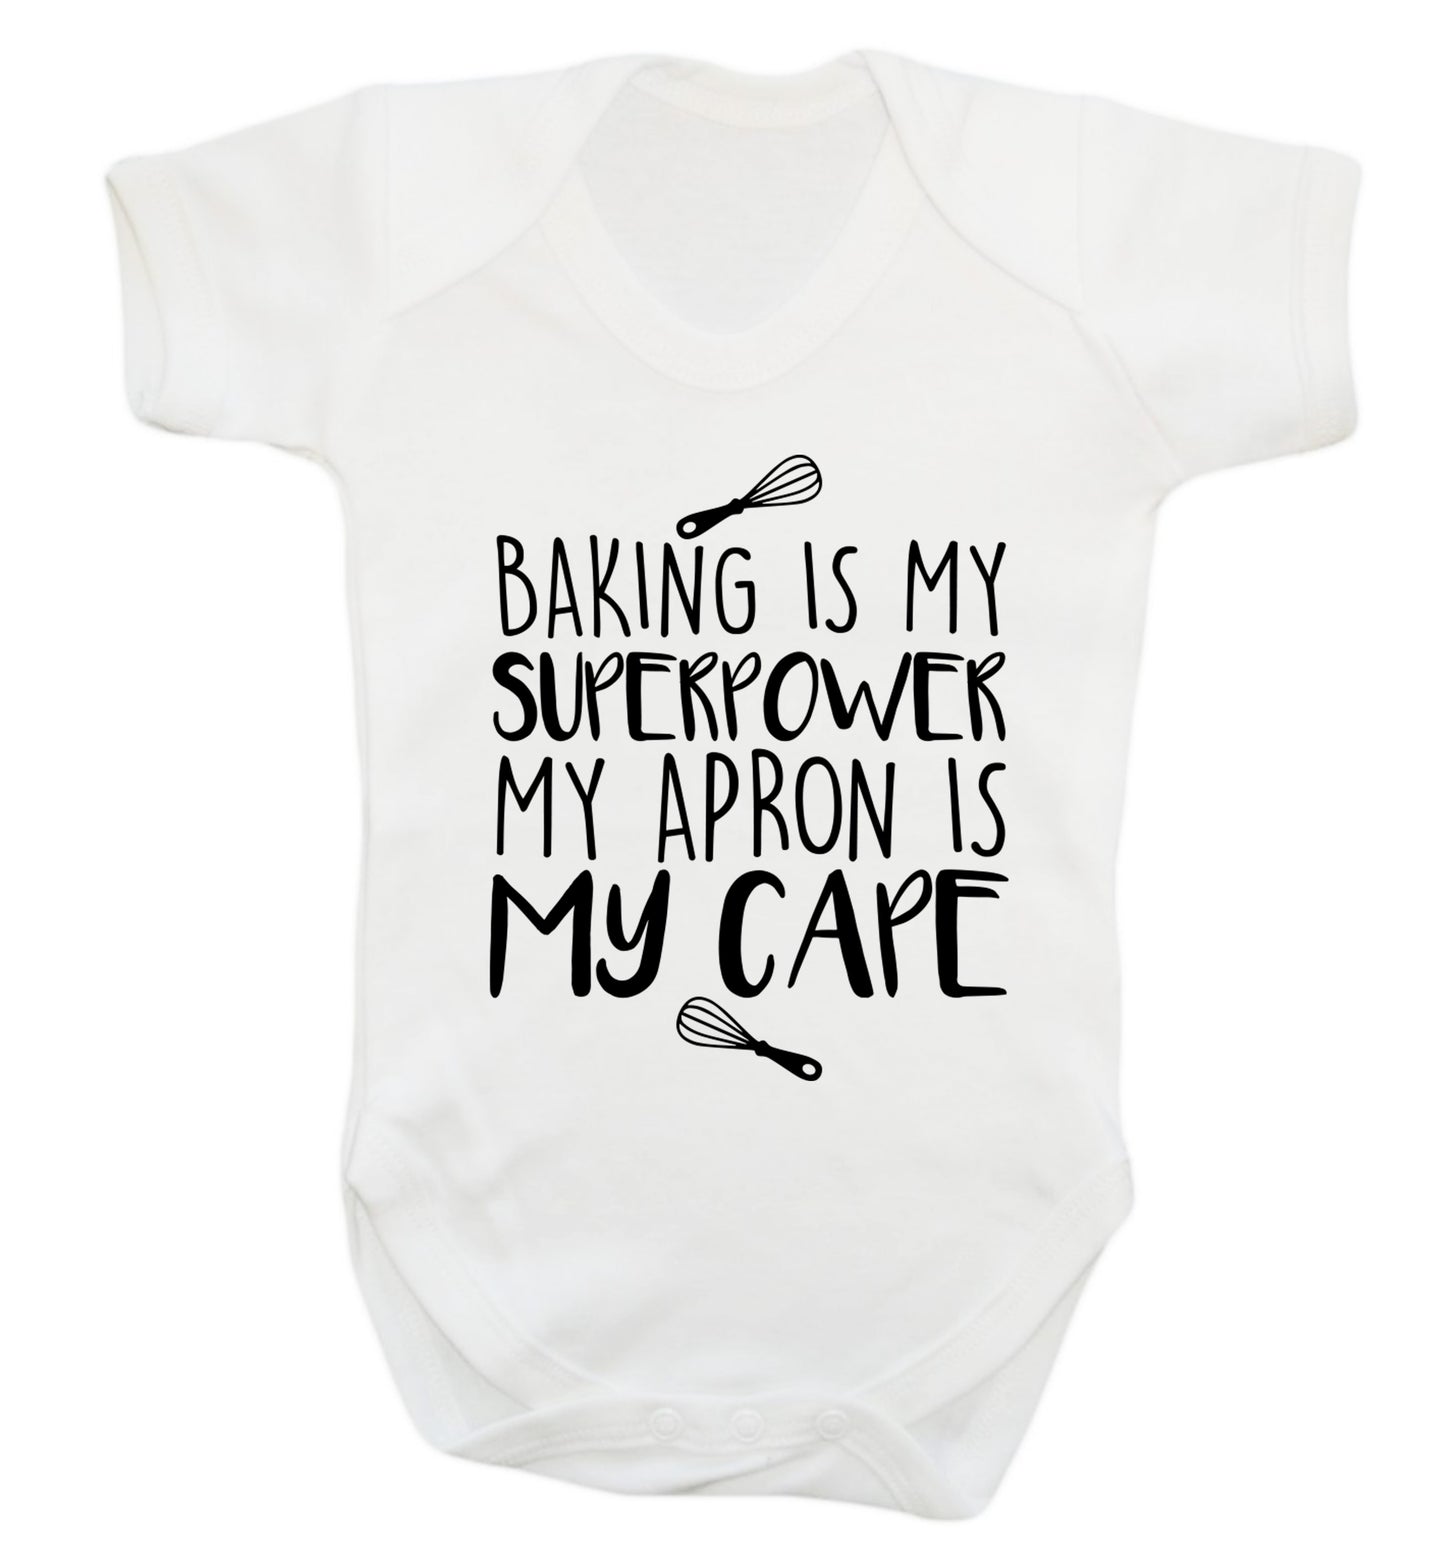 Baking is my superpower my apron is my cape Baby Vest white 18-24 months